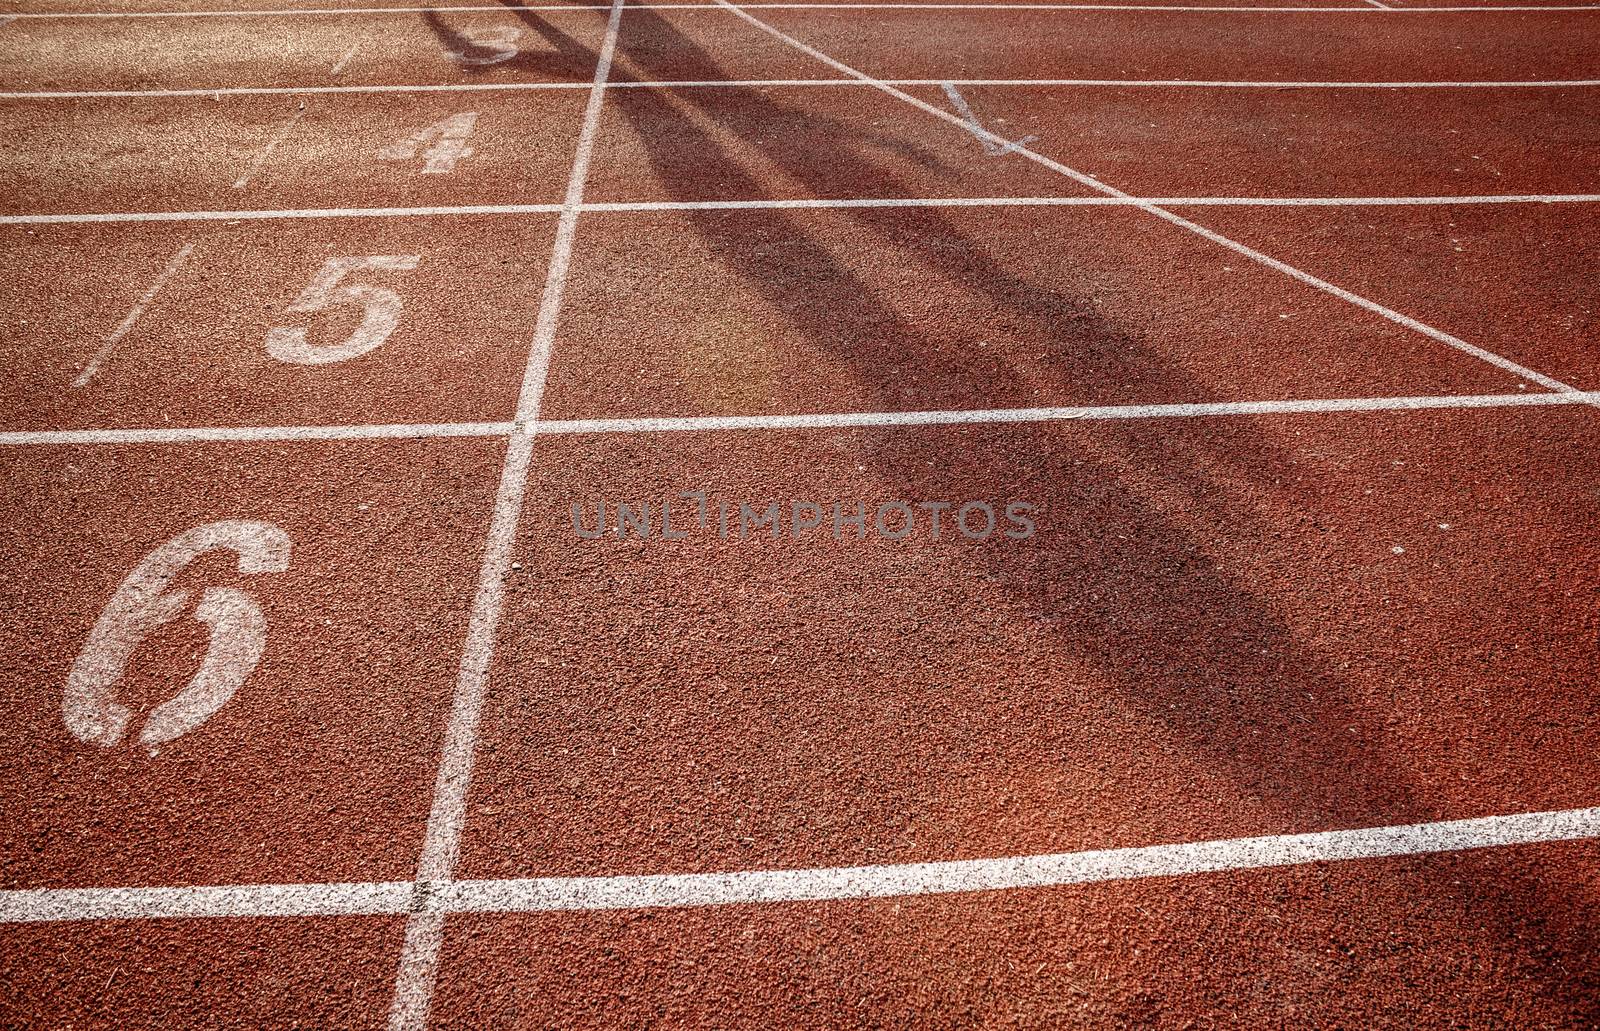 number on running track with shadow by letoakin